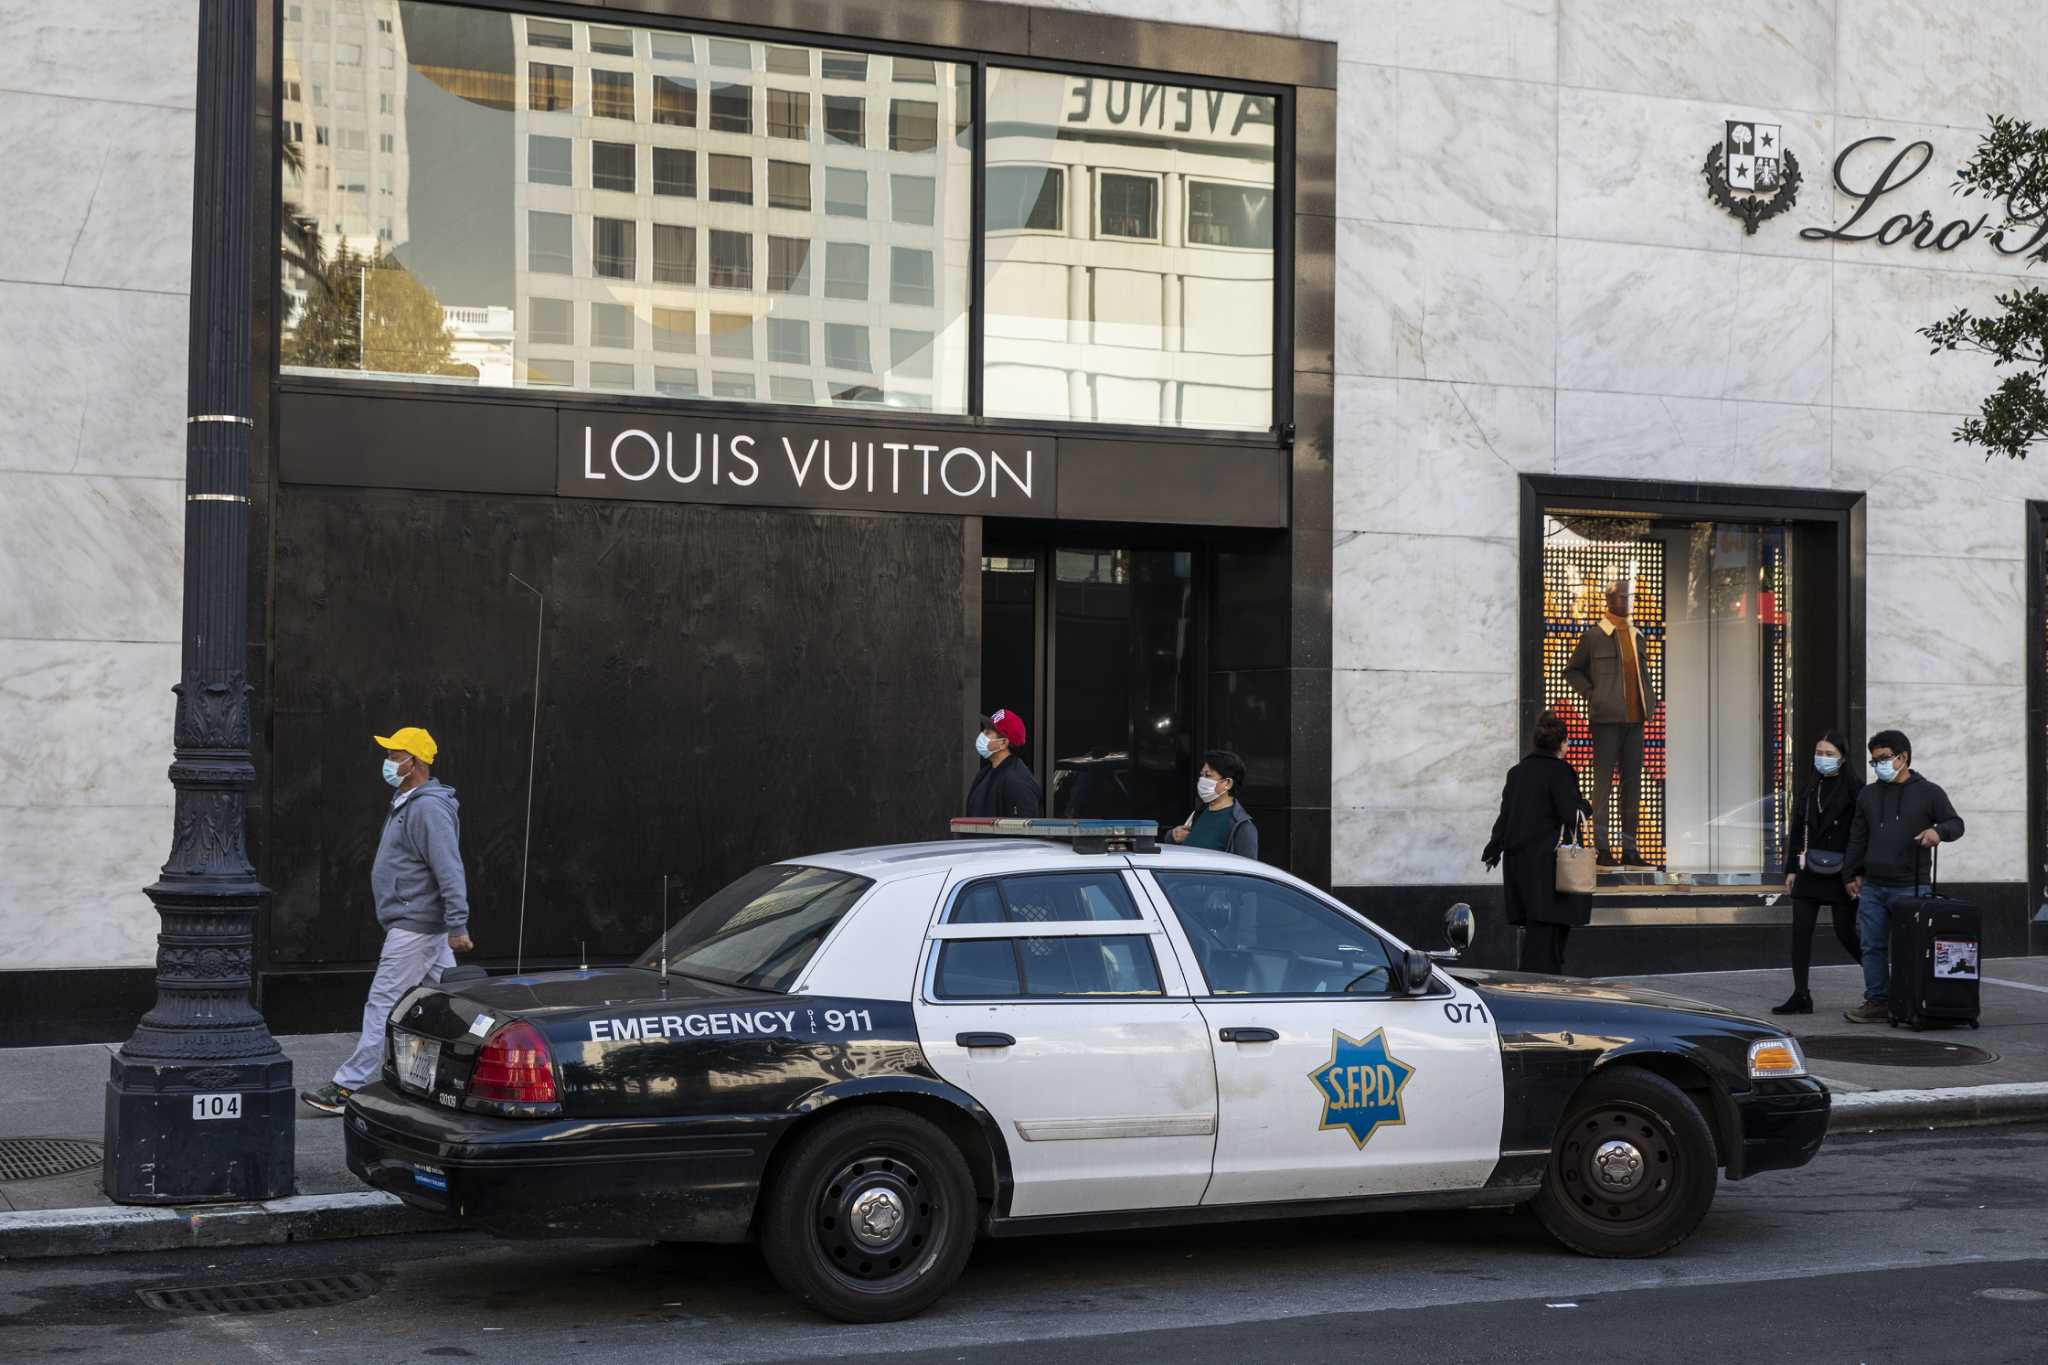 San Francisco Louis Vuitton store decimated Video shows police chase  thieves after robbery  Daily Mail Online